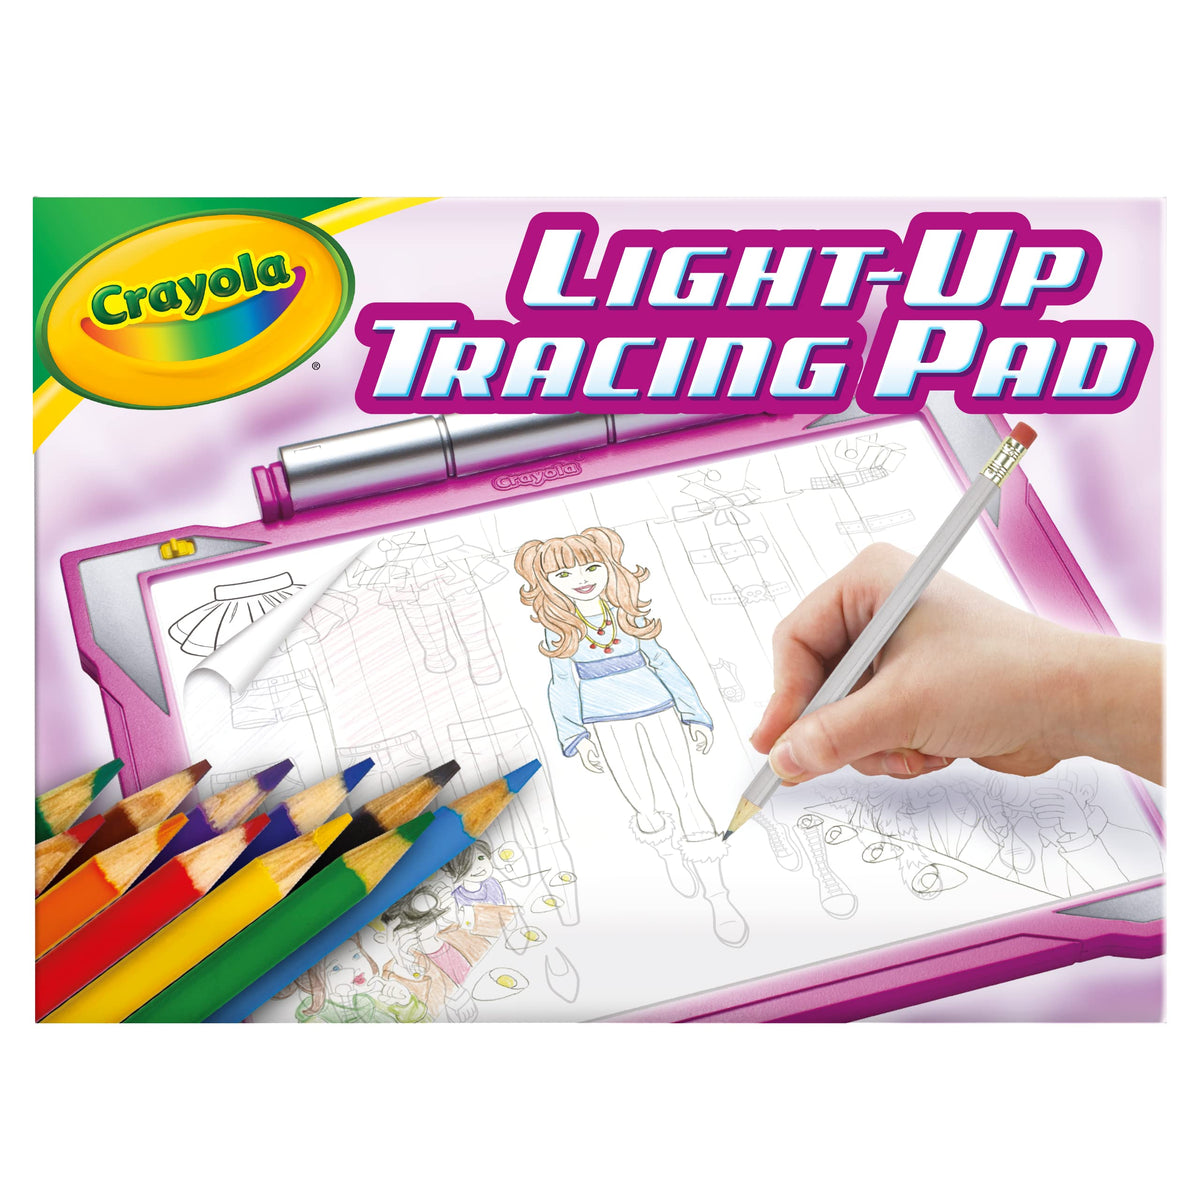 Crayola Light Up Tracing Pad with Eye-Soft Technology, Gift 